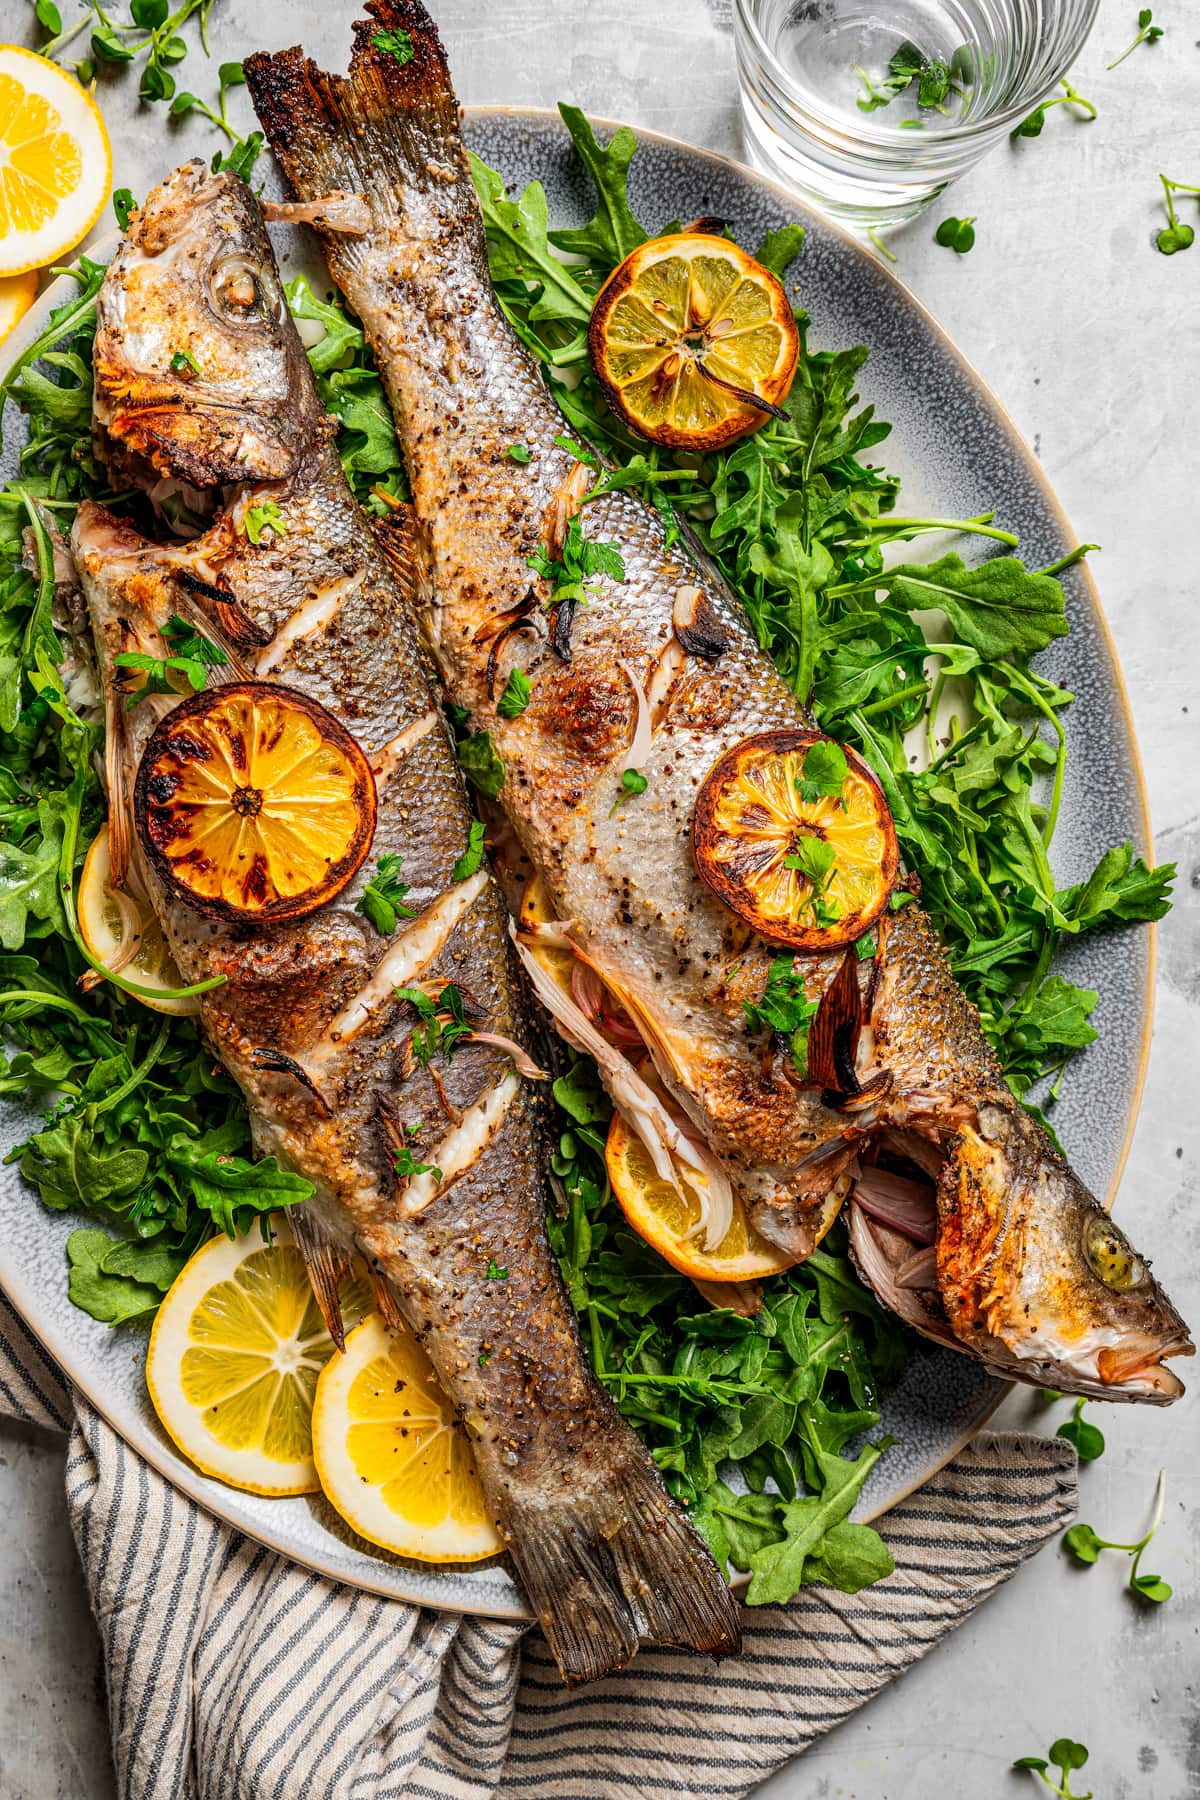 Branzino served on a serving platter and garnished with lemon slices and green herbs.